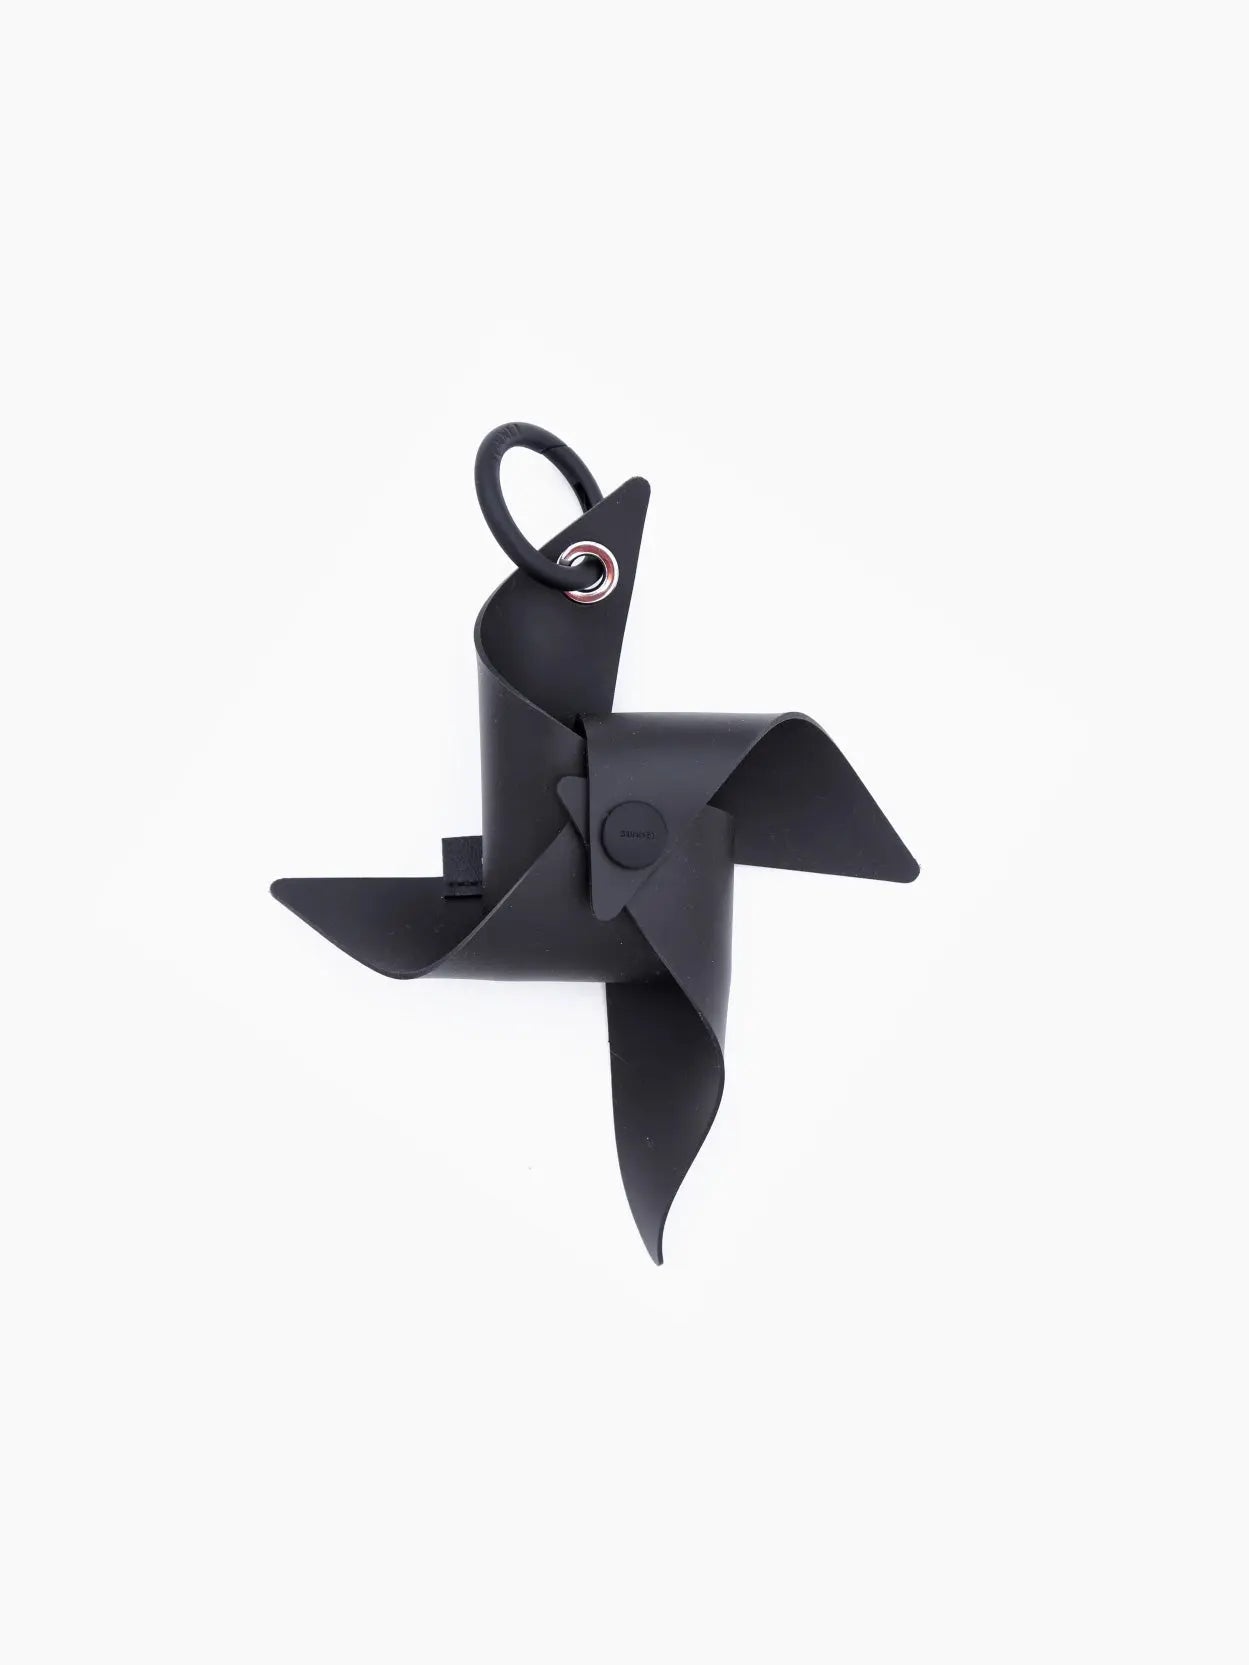 A black, modern pinwheel-shaped object with four blades, centrally fastened and mounted on a small ring, is isolated on a white background. Discover unique items like the Sunnei Gomma Girandola Airpods Holder Black at Bassalstore in Barcelona.